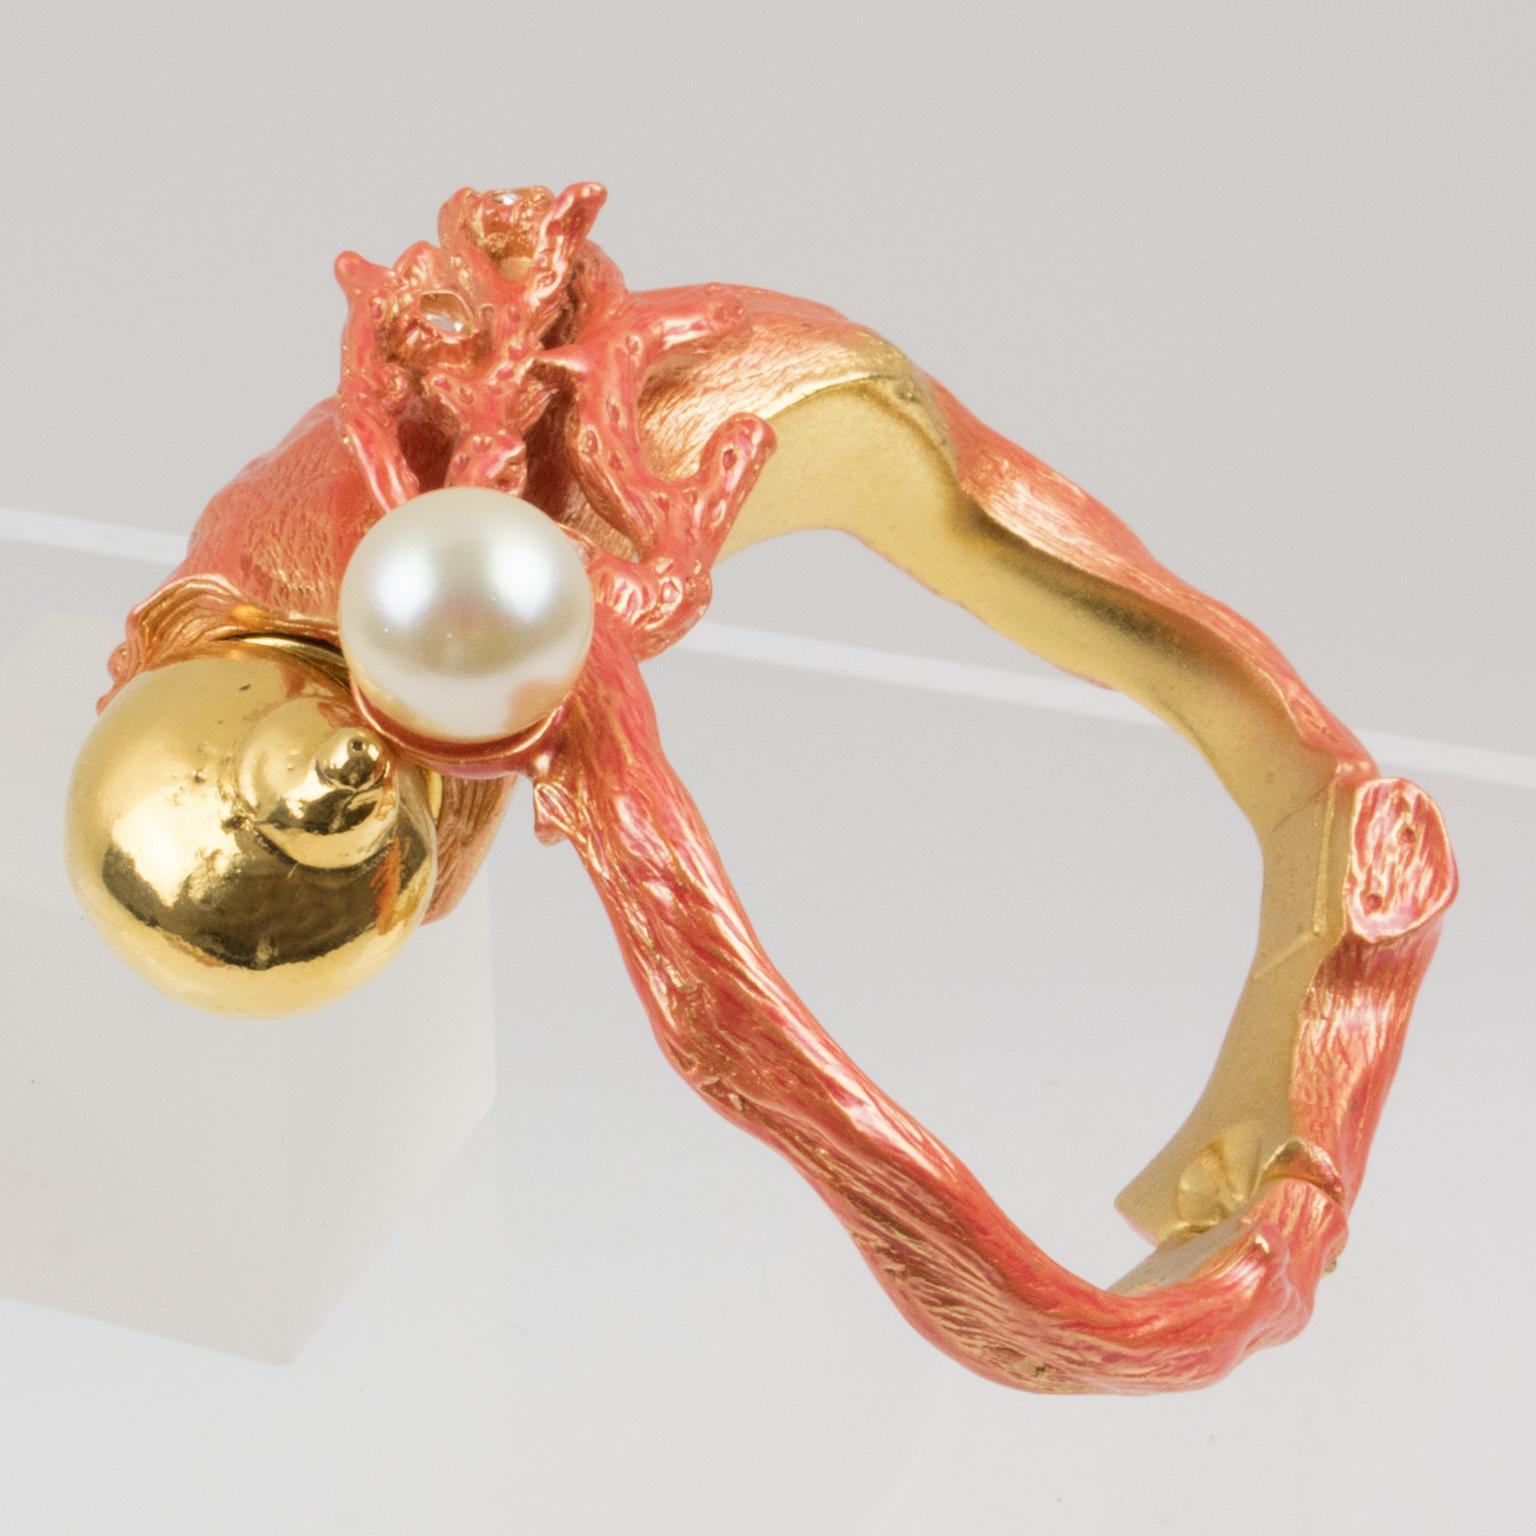 Stunning Christian Dior Paris signed clamper bracelet bangle designed for the launch of his Dune Fragrance in 1987. Sculptural coral branch dimensional design in gilt metal all textured with a bright orange enameling, topped with clear glass